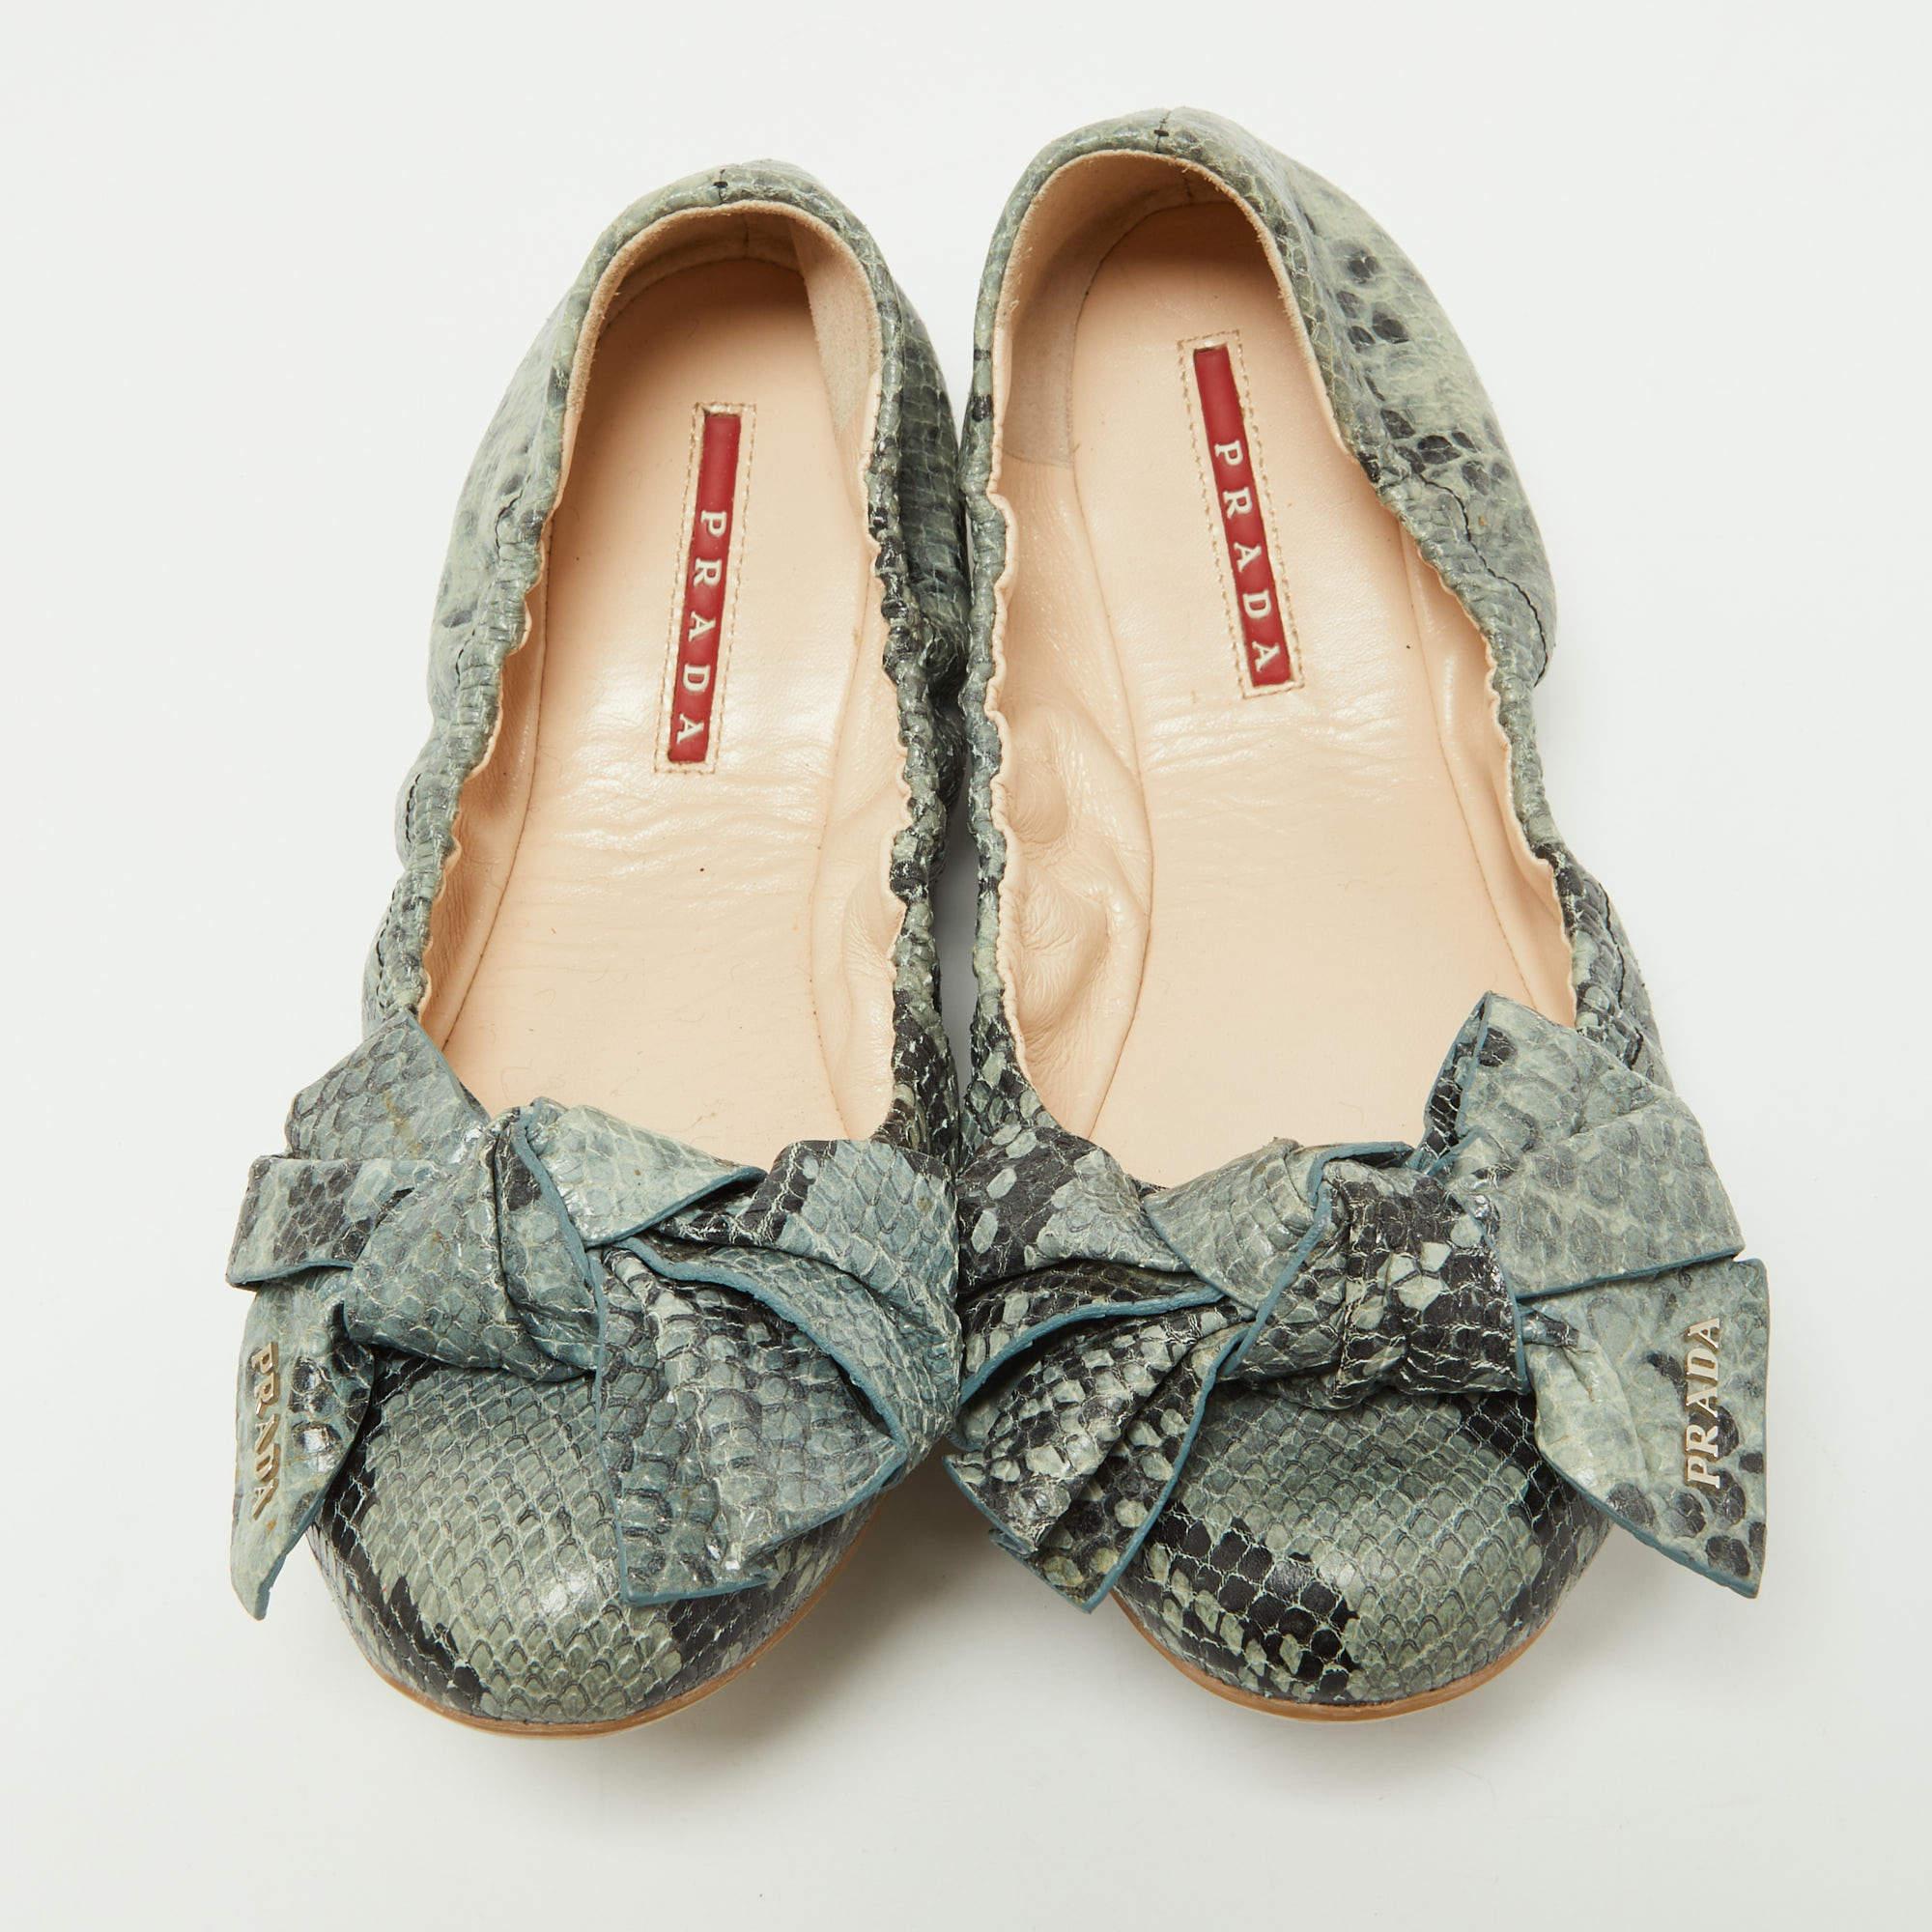 Creations from Prada are effortlessly stylish just like these ballet flats. They have been crafted from python-embossed leather and designed with round toes and logo detailed knotted bows on the vamps. They are endowed with comfortable leather-lined